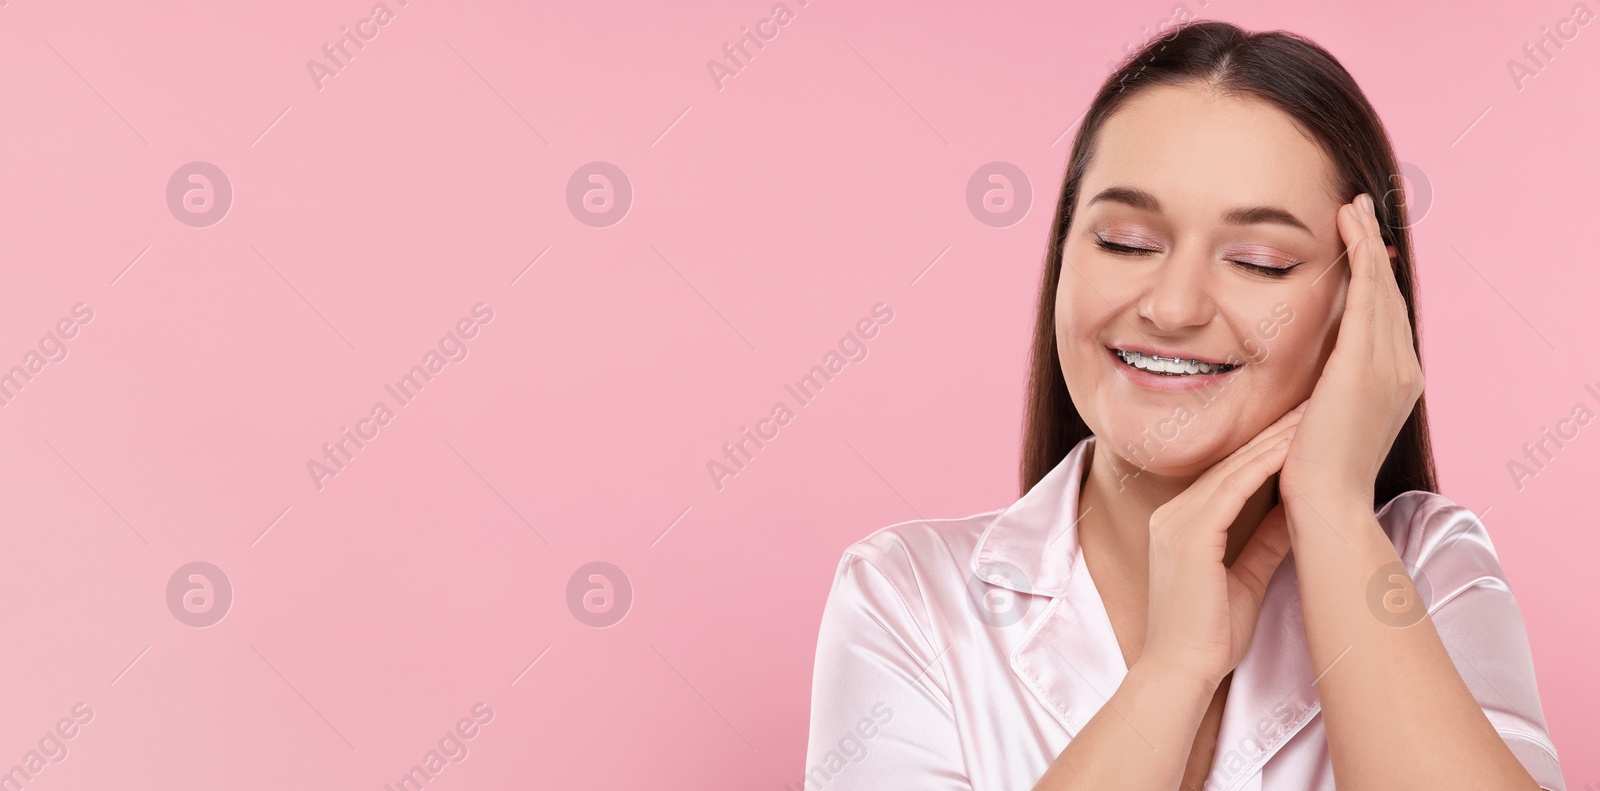 Image of Smiling woman with braces on pink background. Banner design with space for text